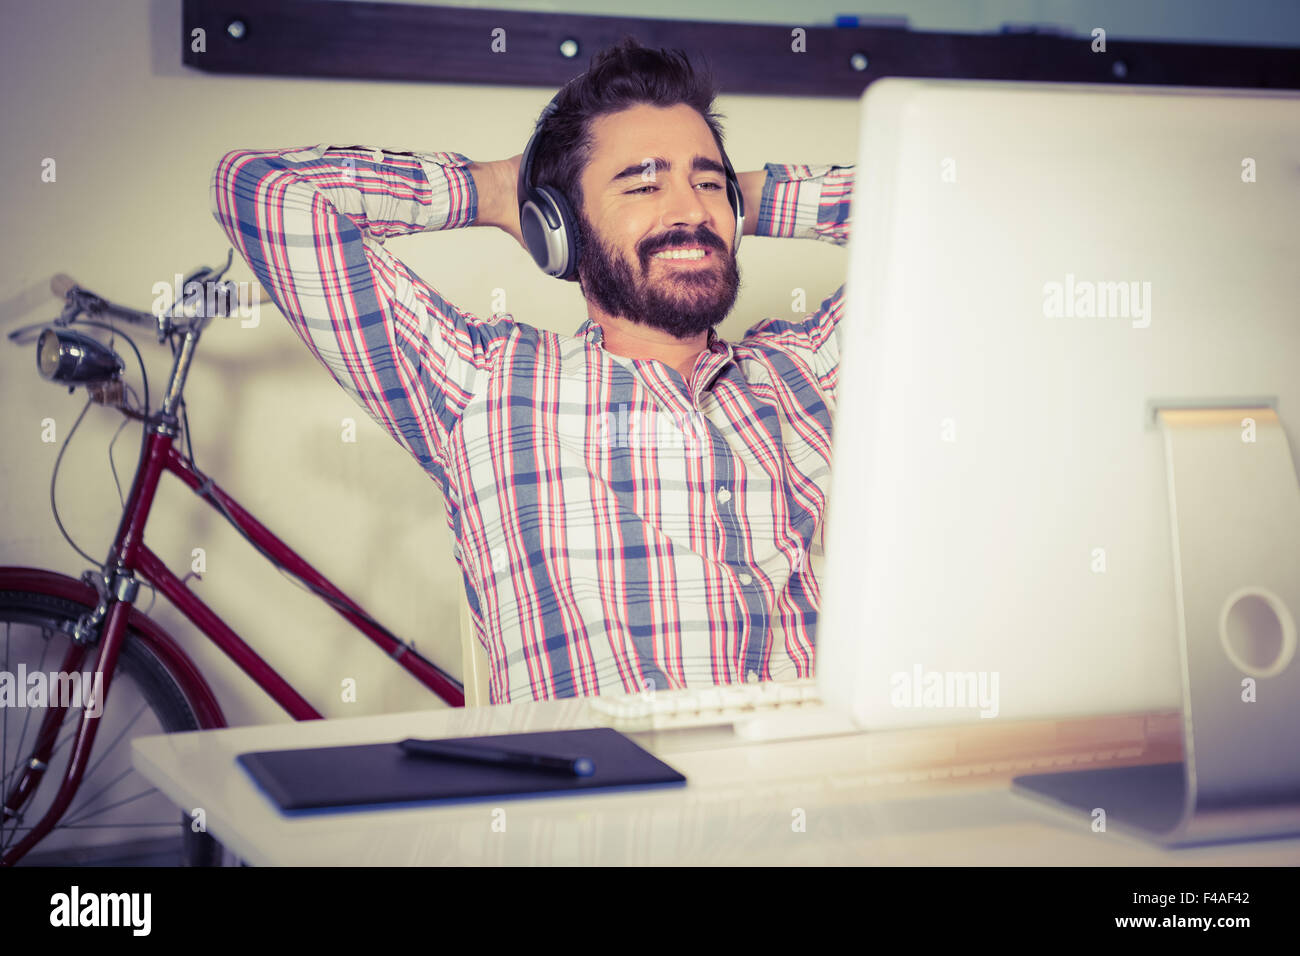 Happy businessman listening music while relaxing with arms raised Stock Photo